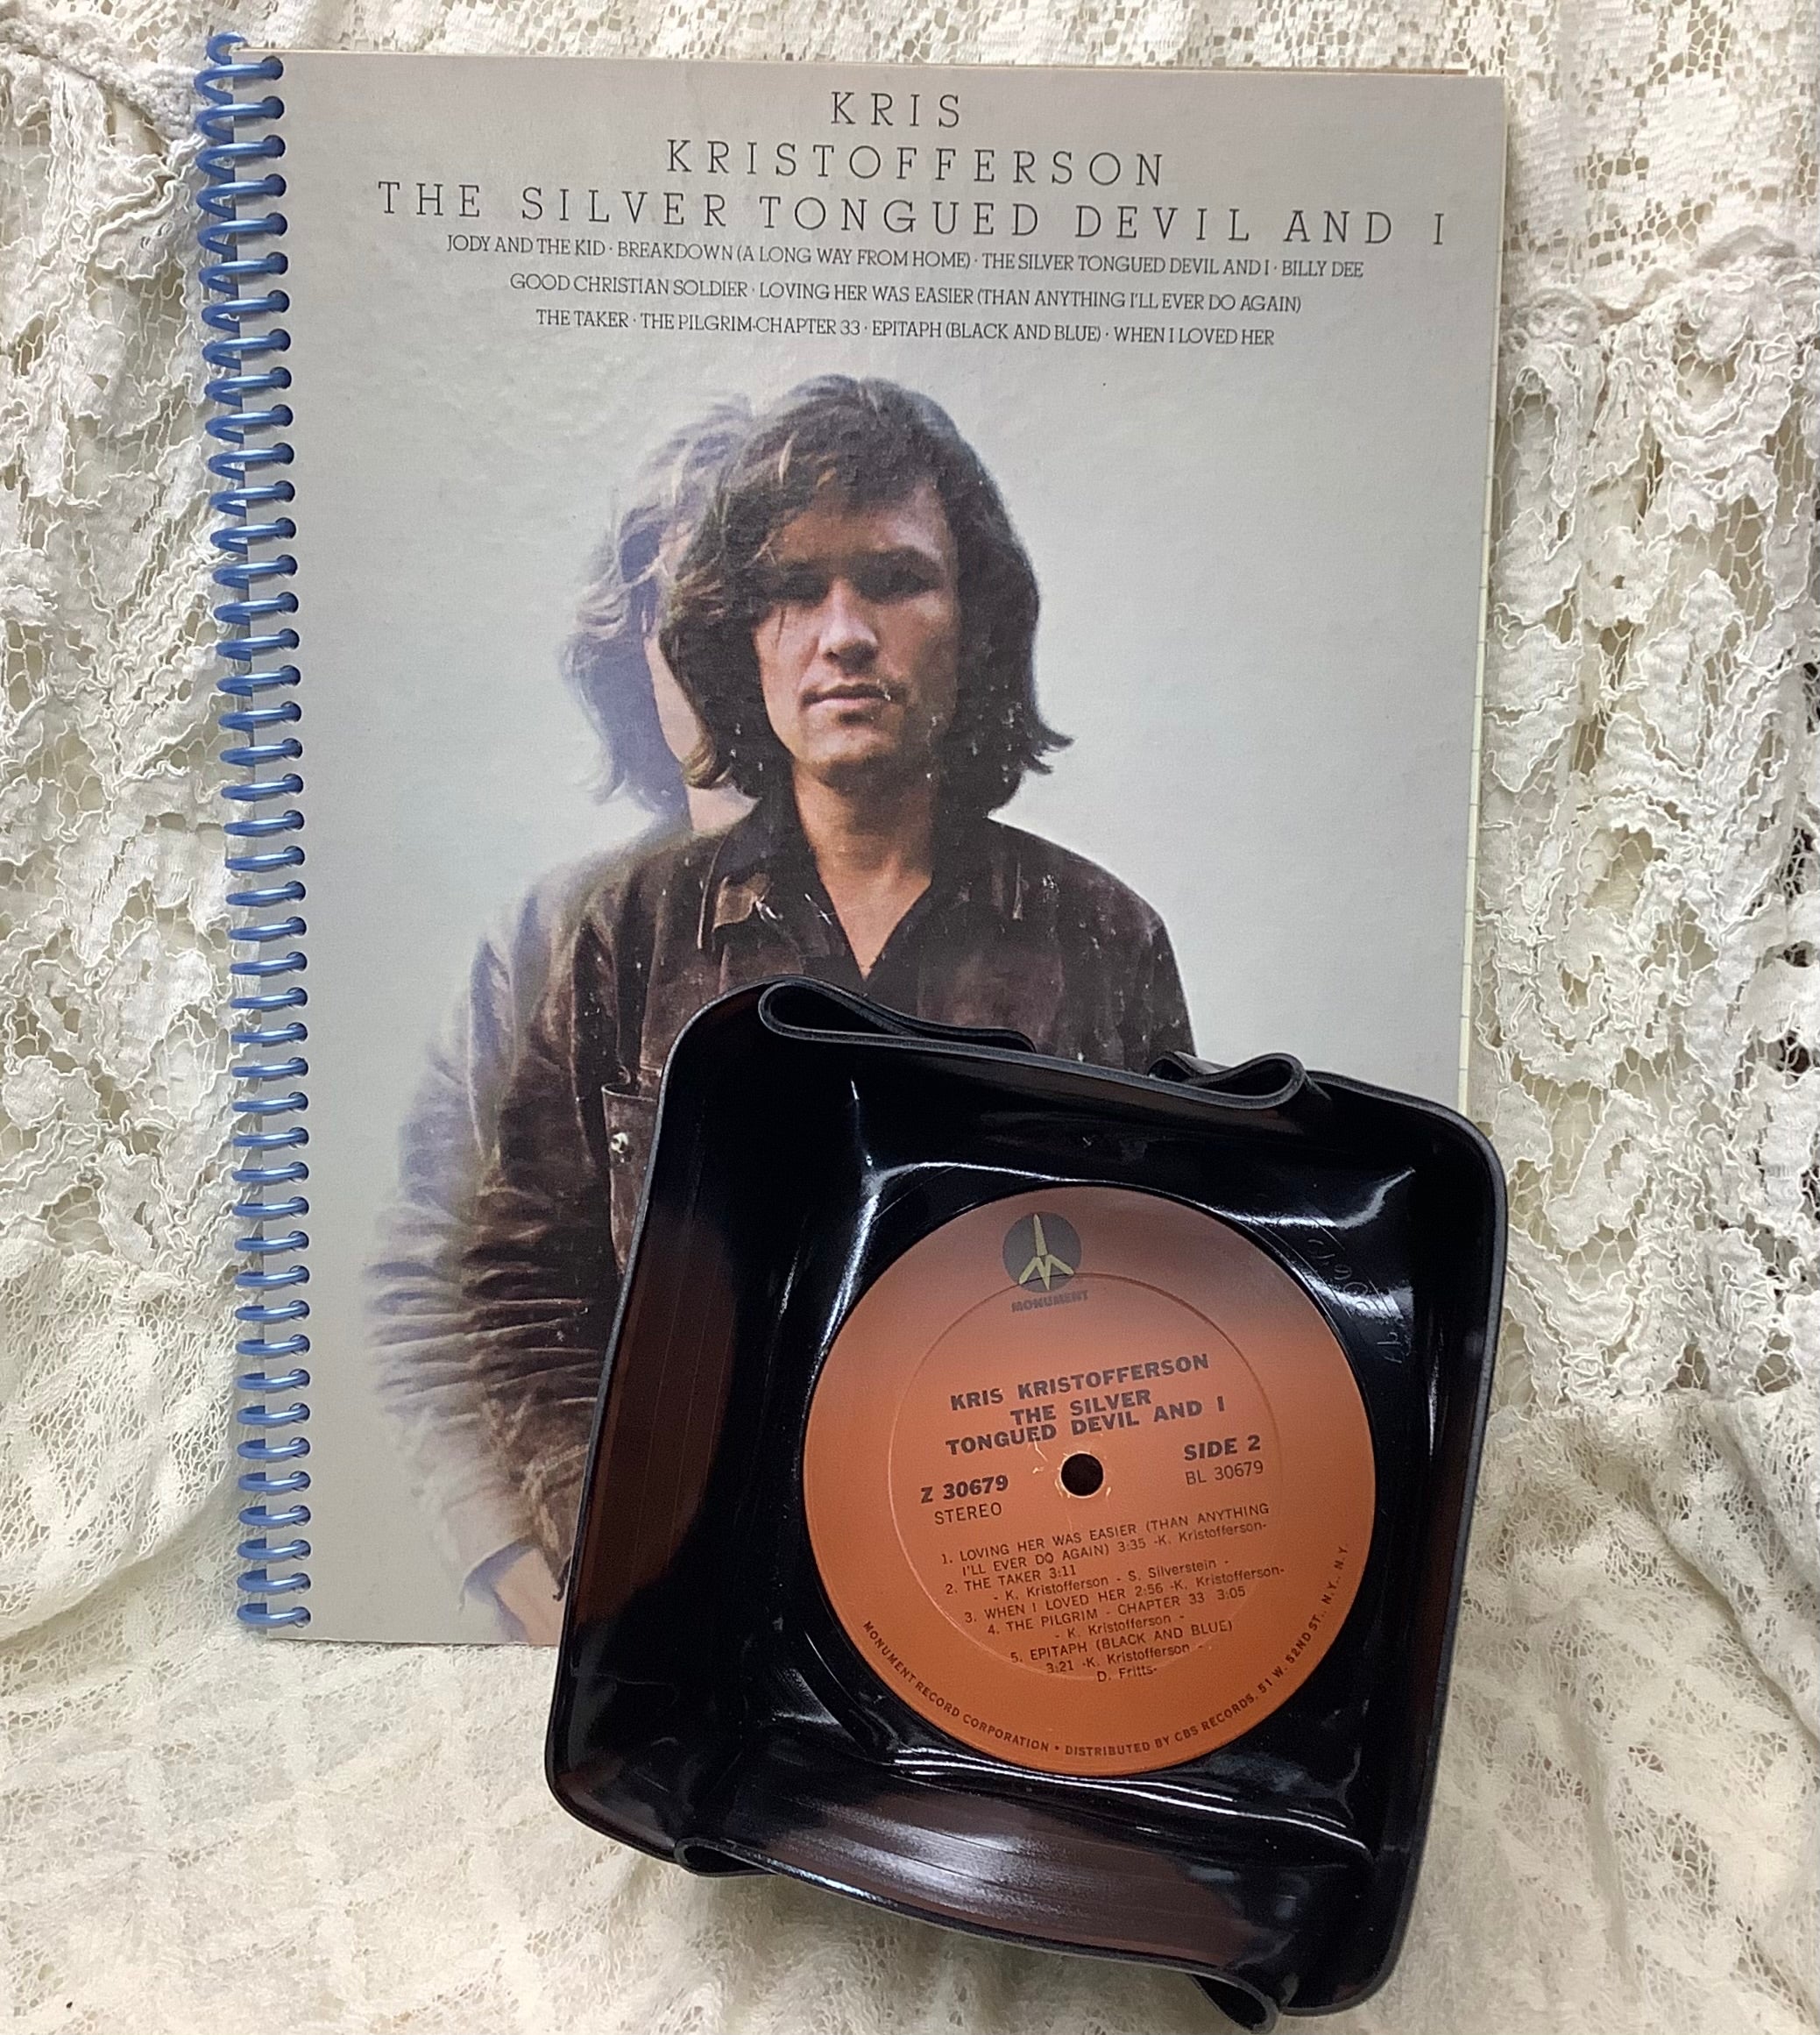 Record Bowl Kris Kristofferson The Silver Tongued Devil and I